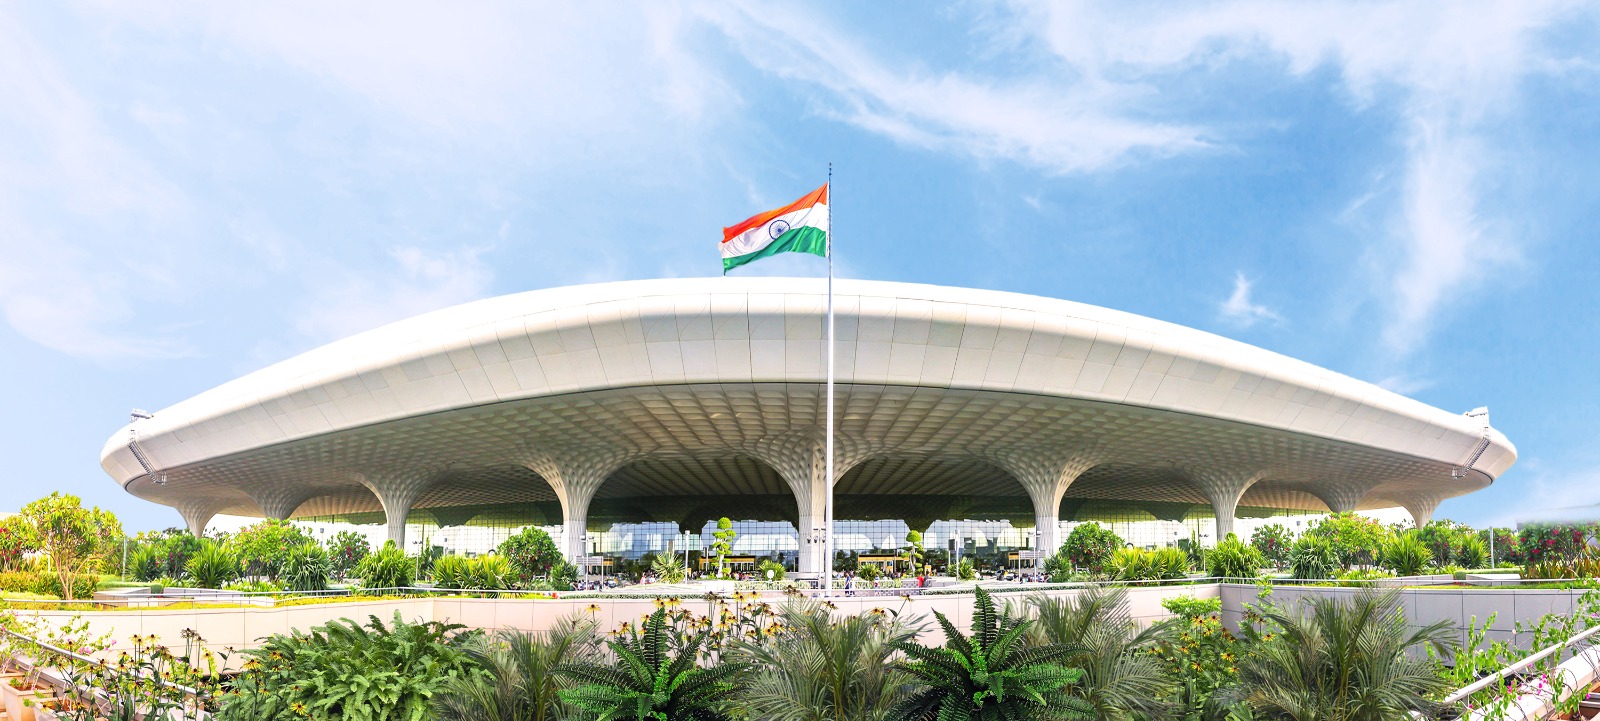 Mumbai International Airport declared ‘Best Airport over 40 million passengers’ in Asia Pacific by Airports Council International (ACI) for the sixth consecutive year